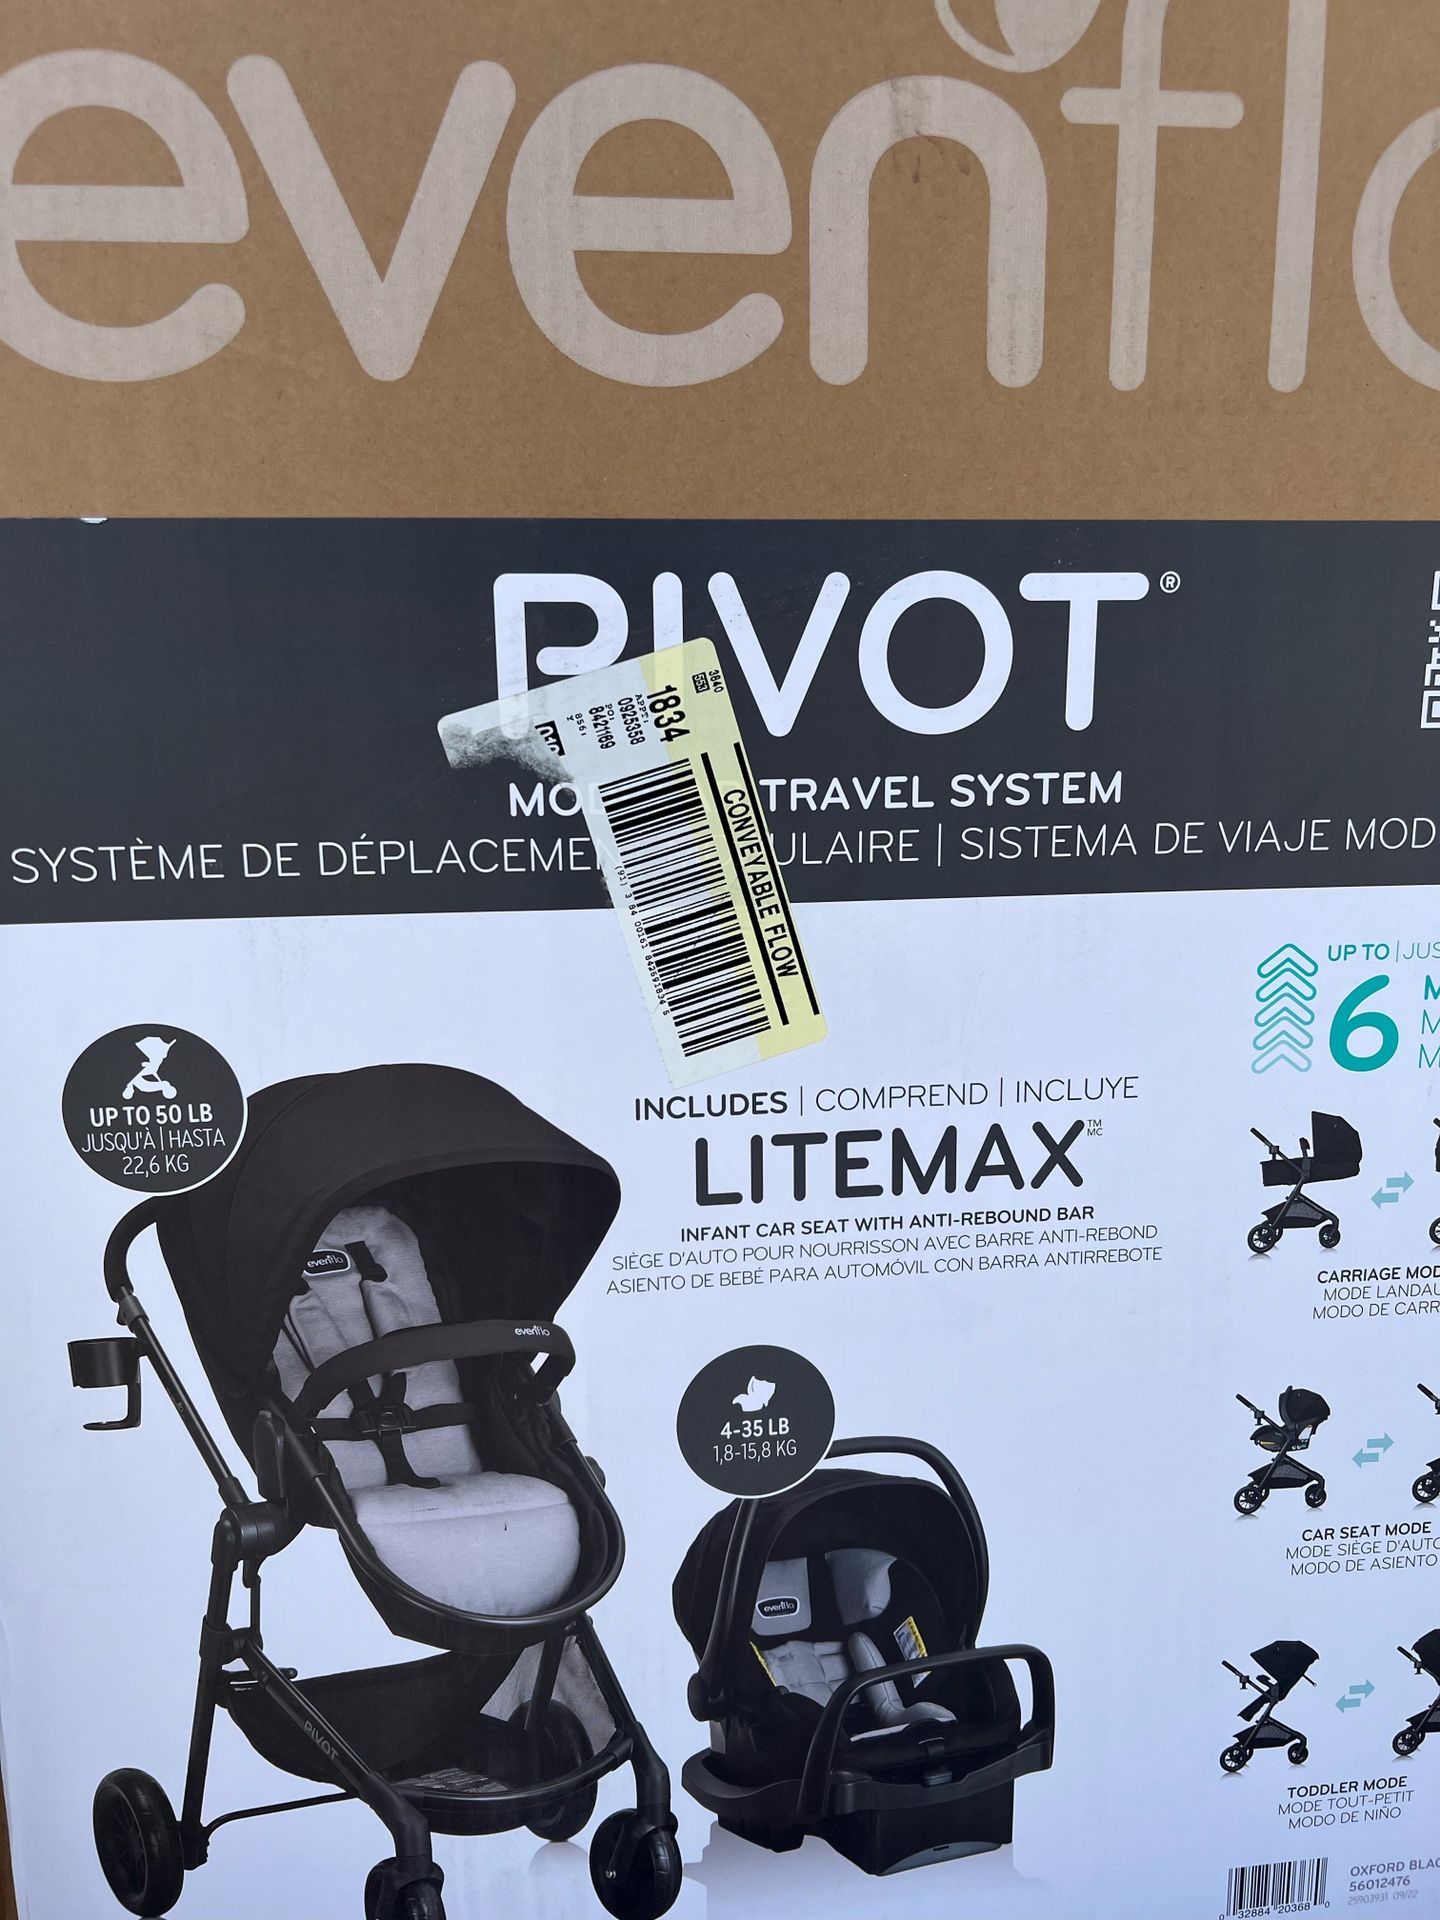 Stroller And Car seat Combo